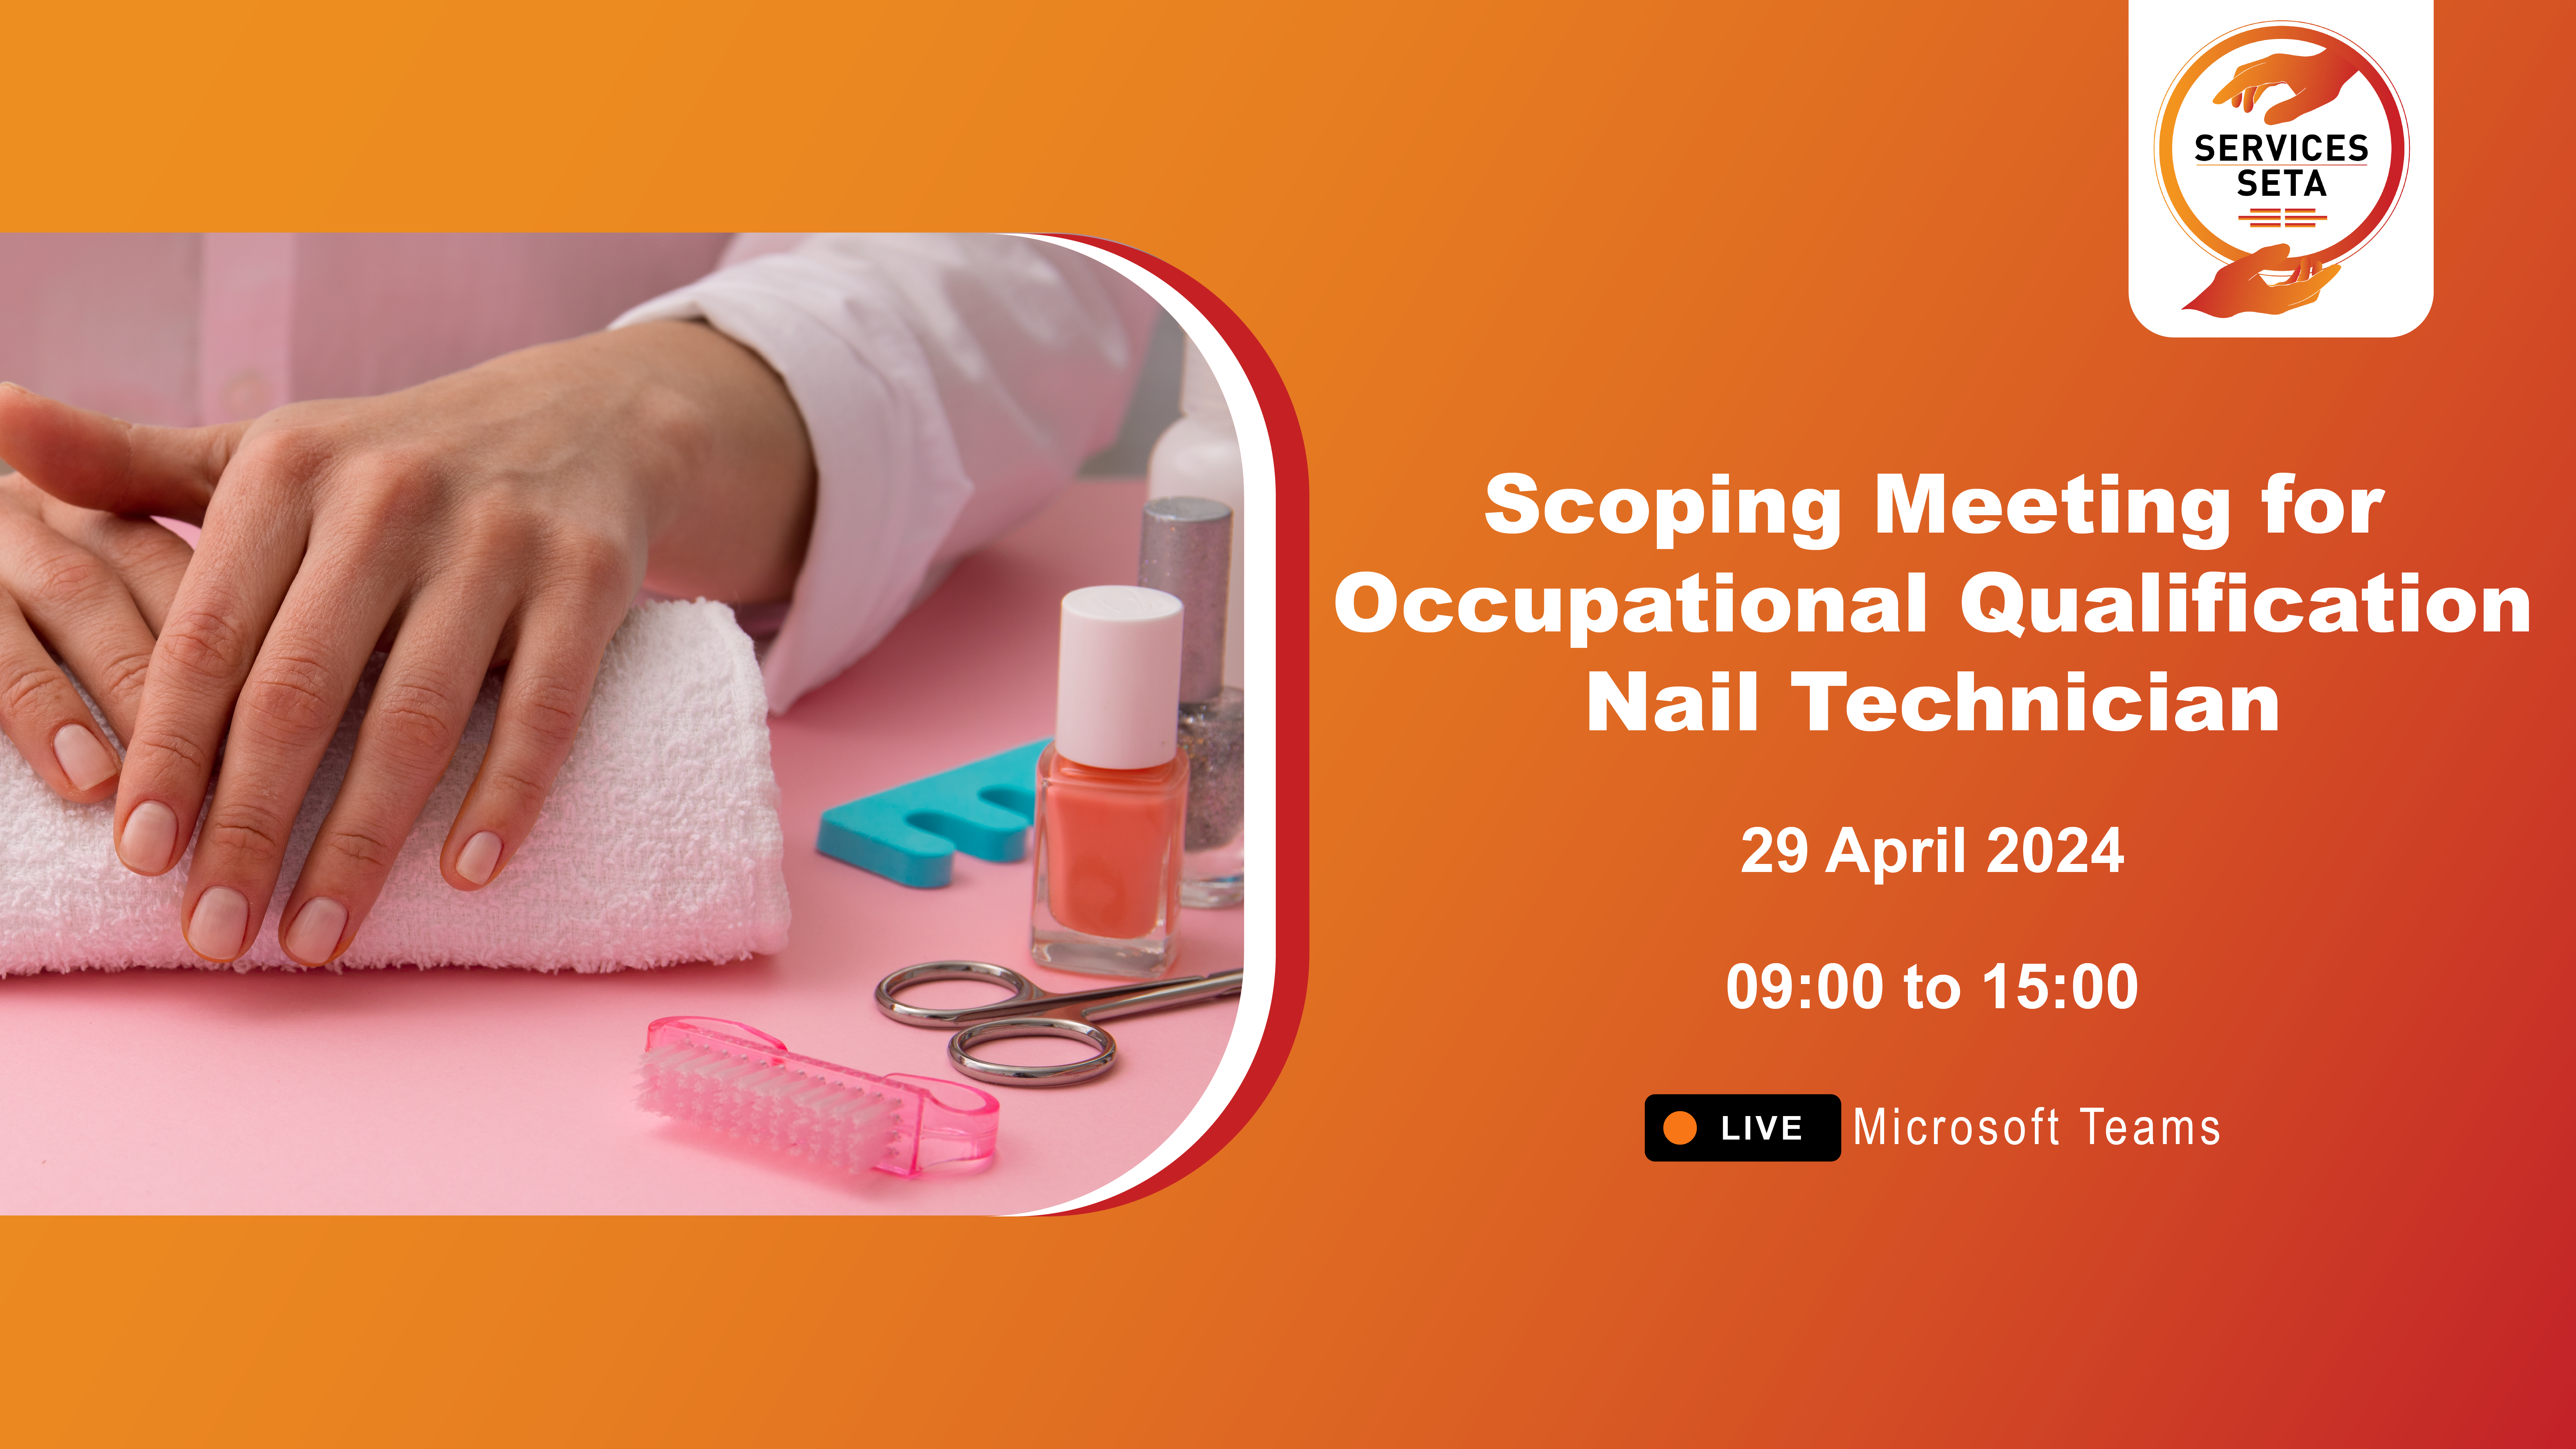 Scoping Meeting for Occupational Qualification Nail Technician